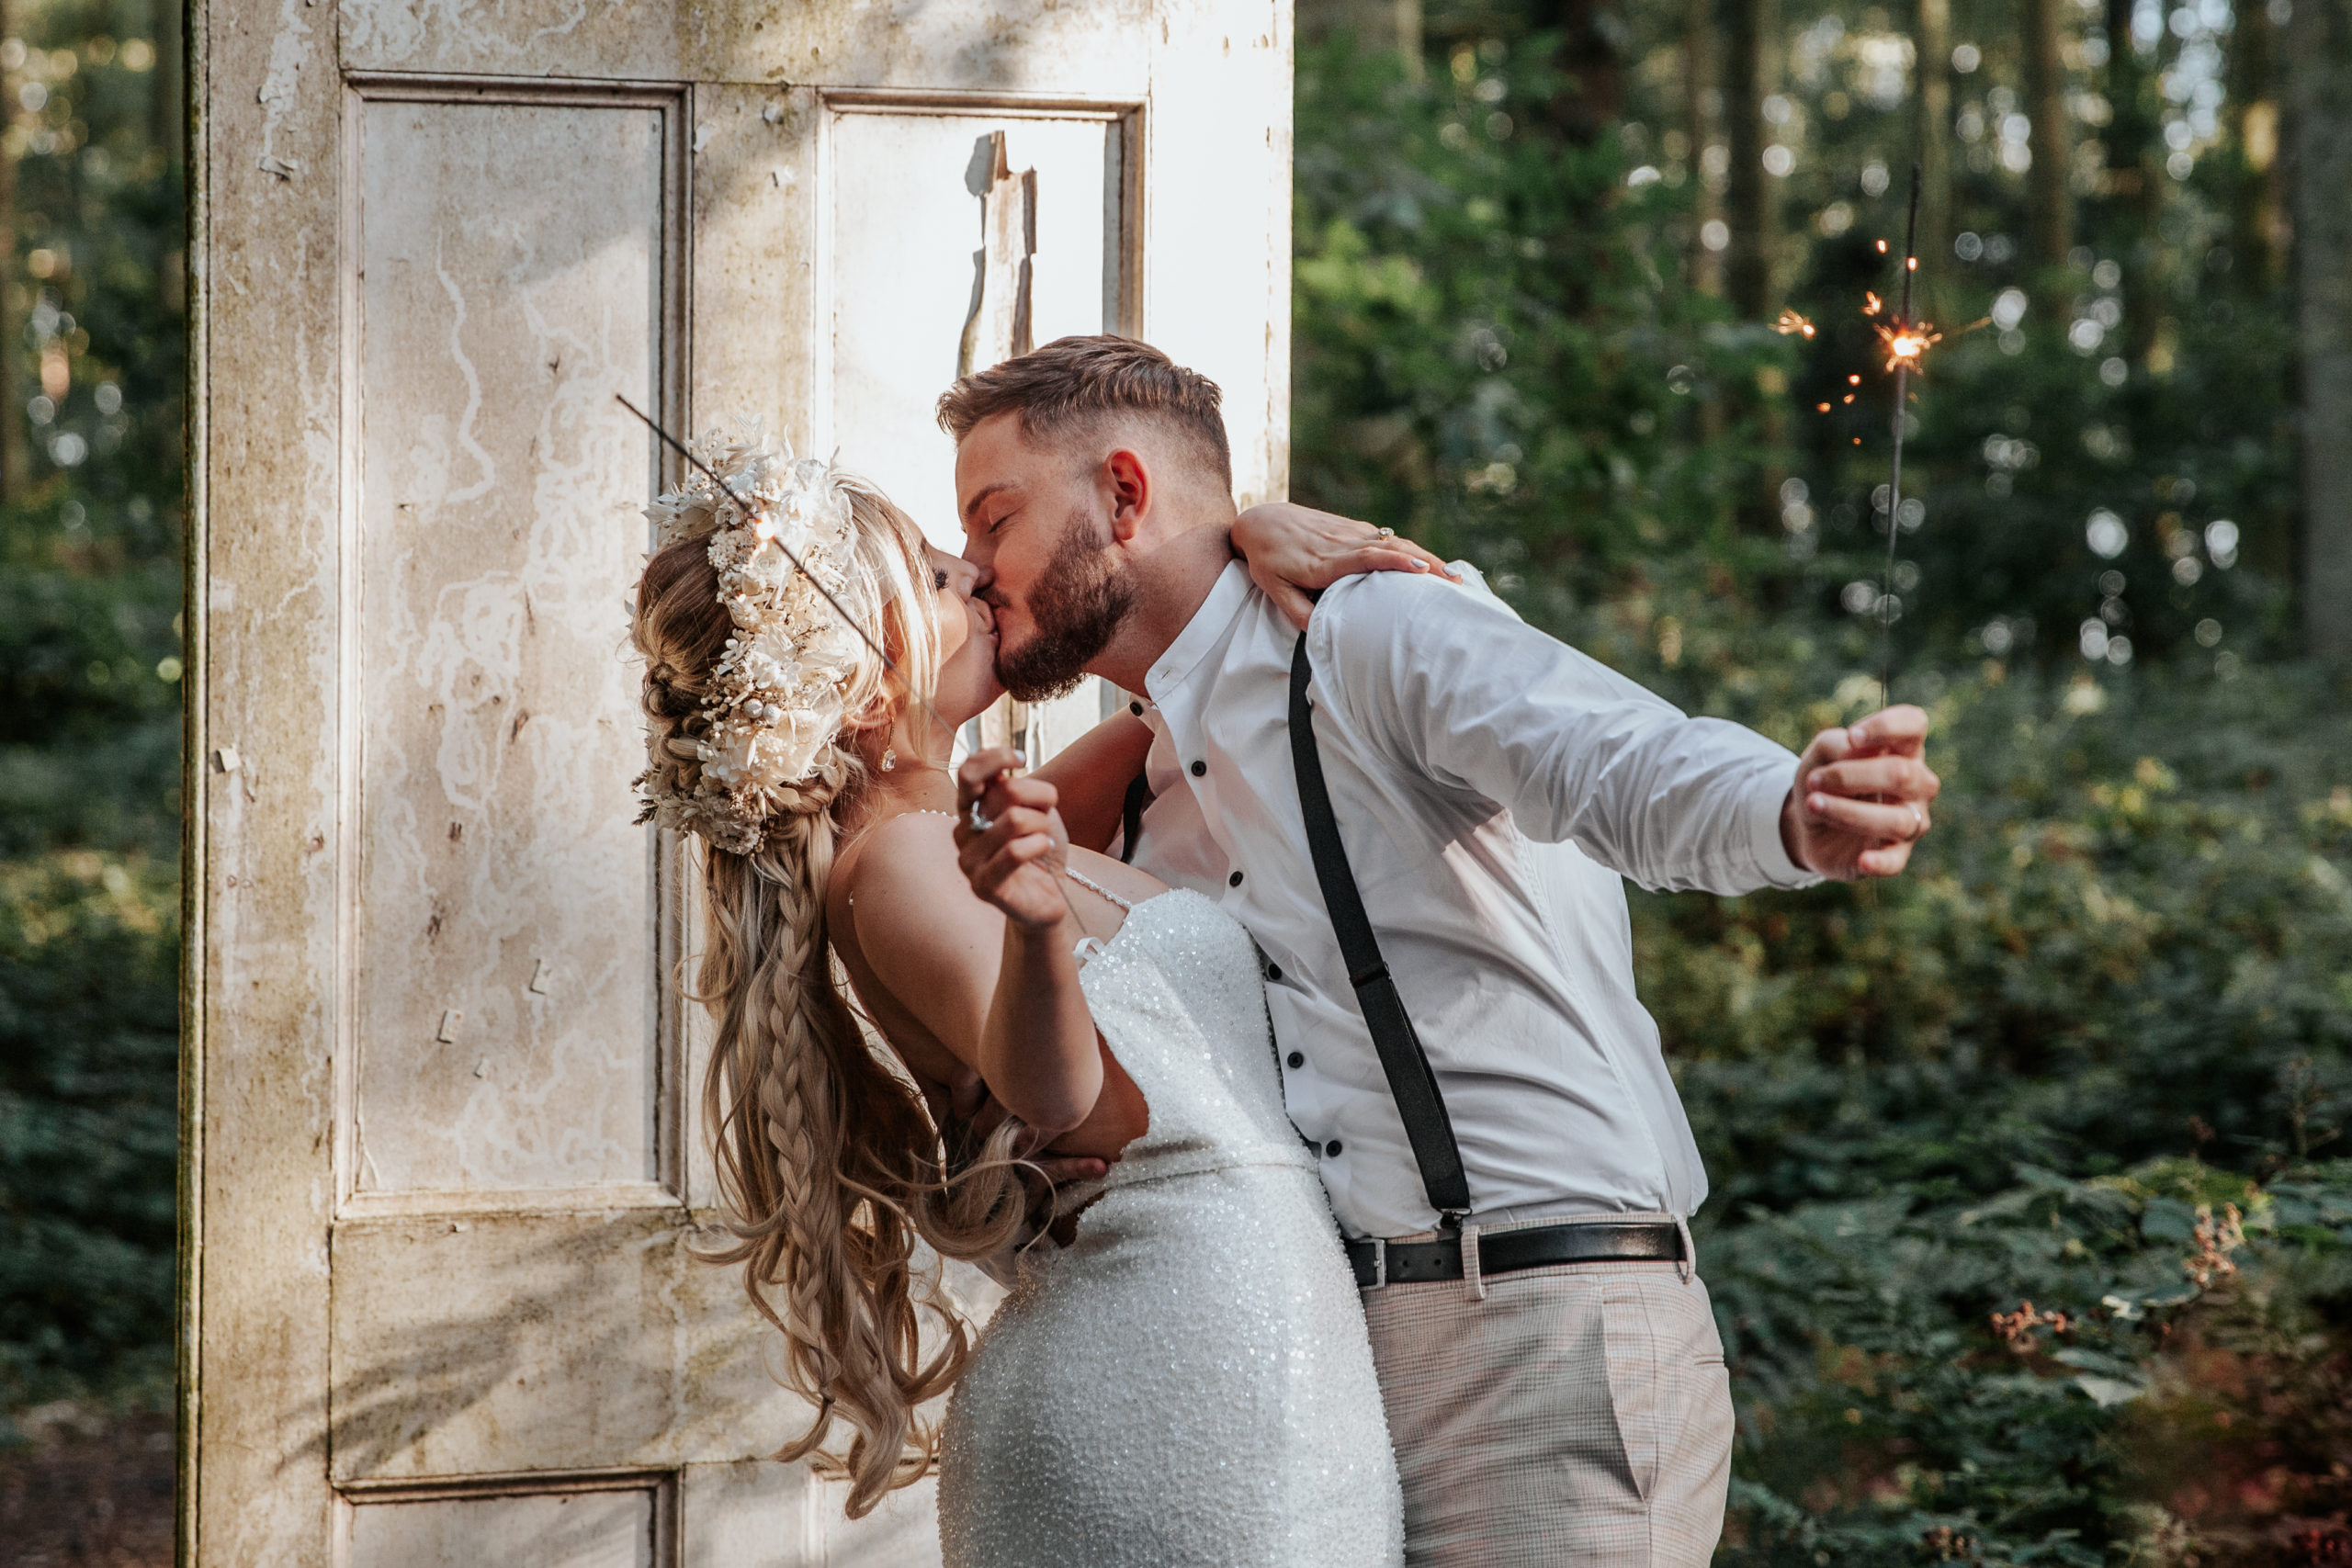 Will and Jess kiss while waving sparklers at golden hour infront of Longton Wood's white doors